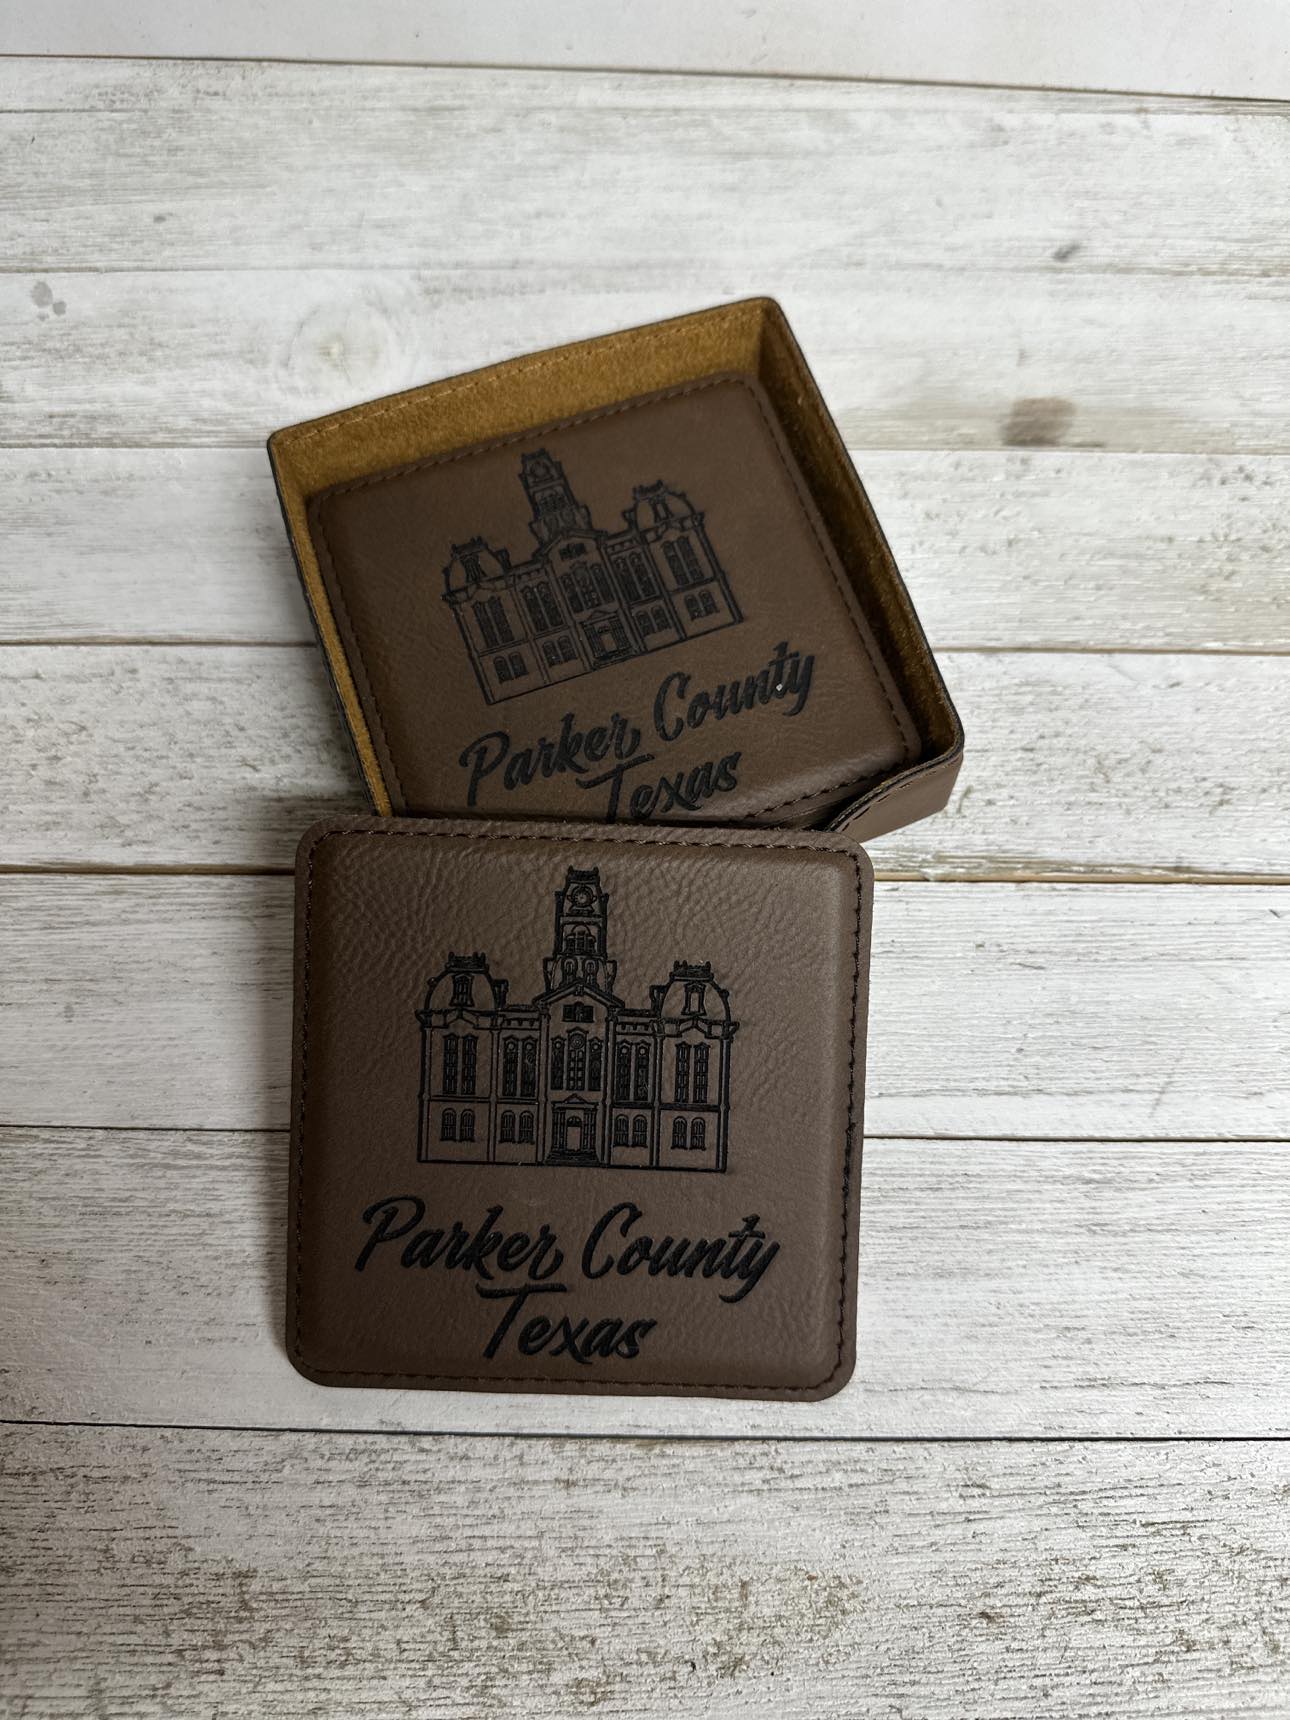 Leather Parker County Texas Coasters